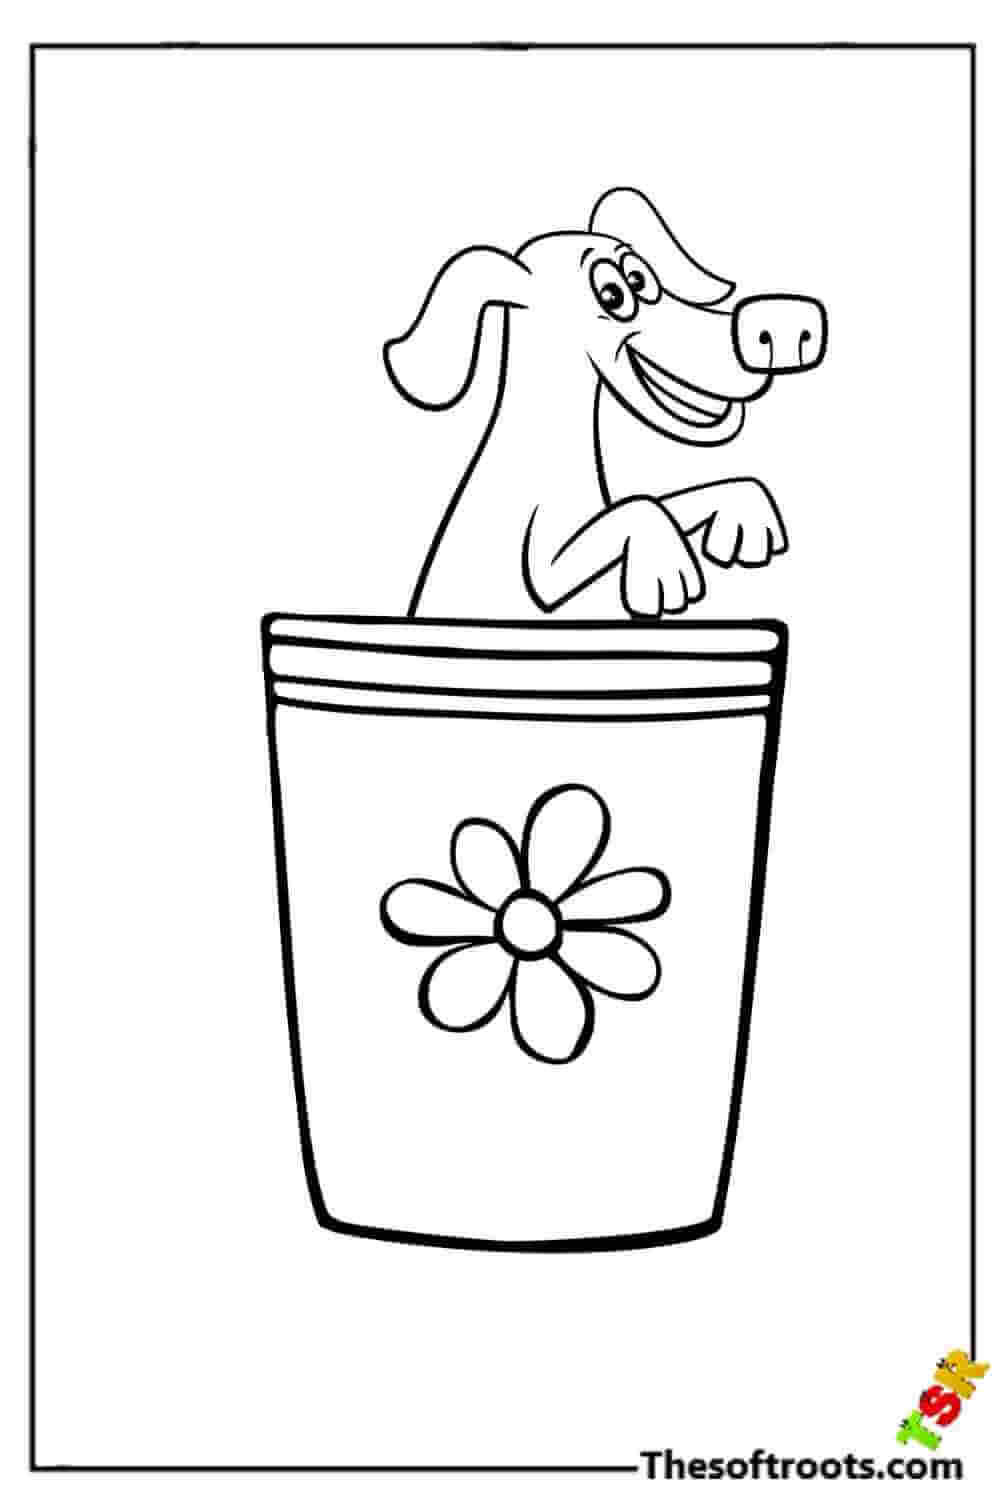 Puppy in pot coloring pages